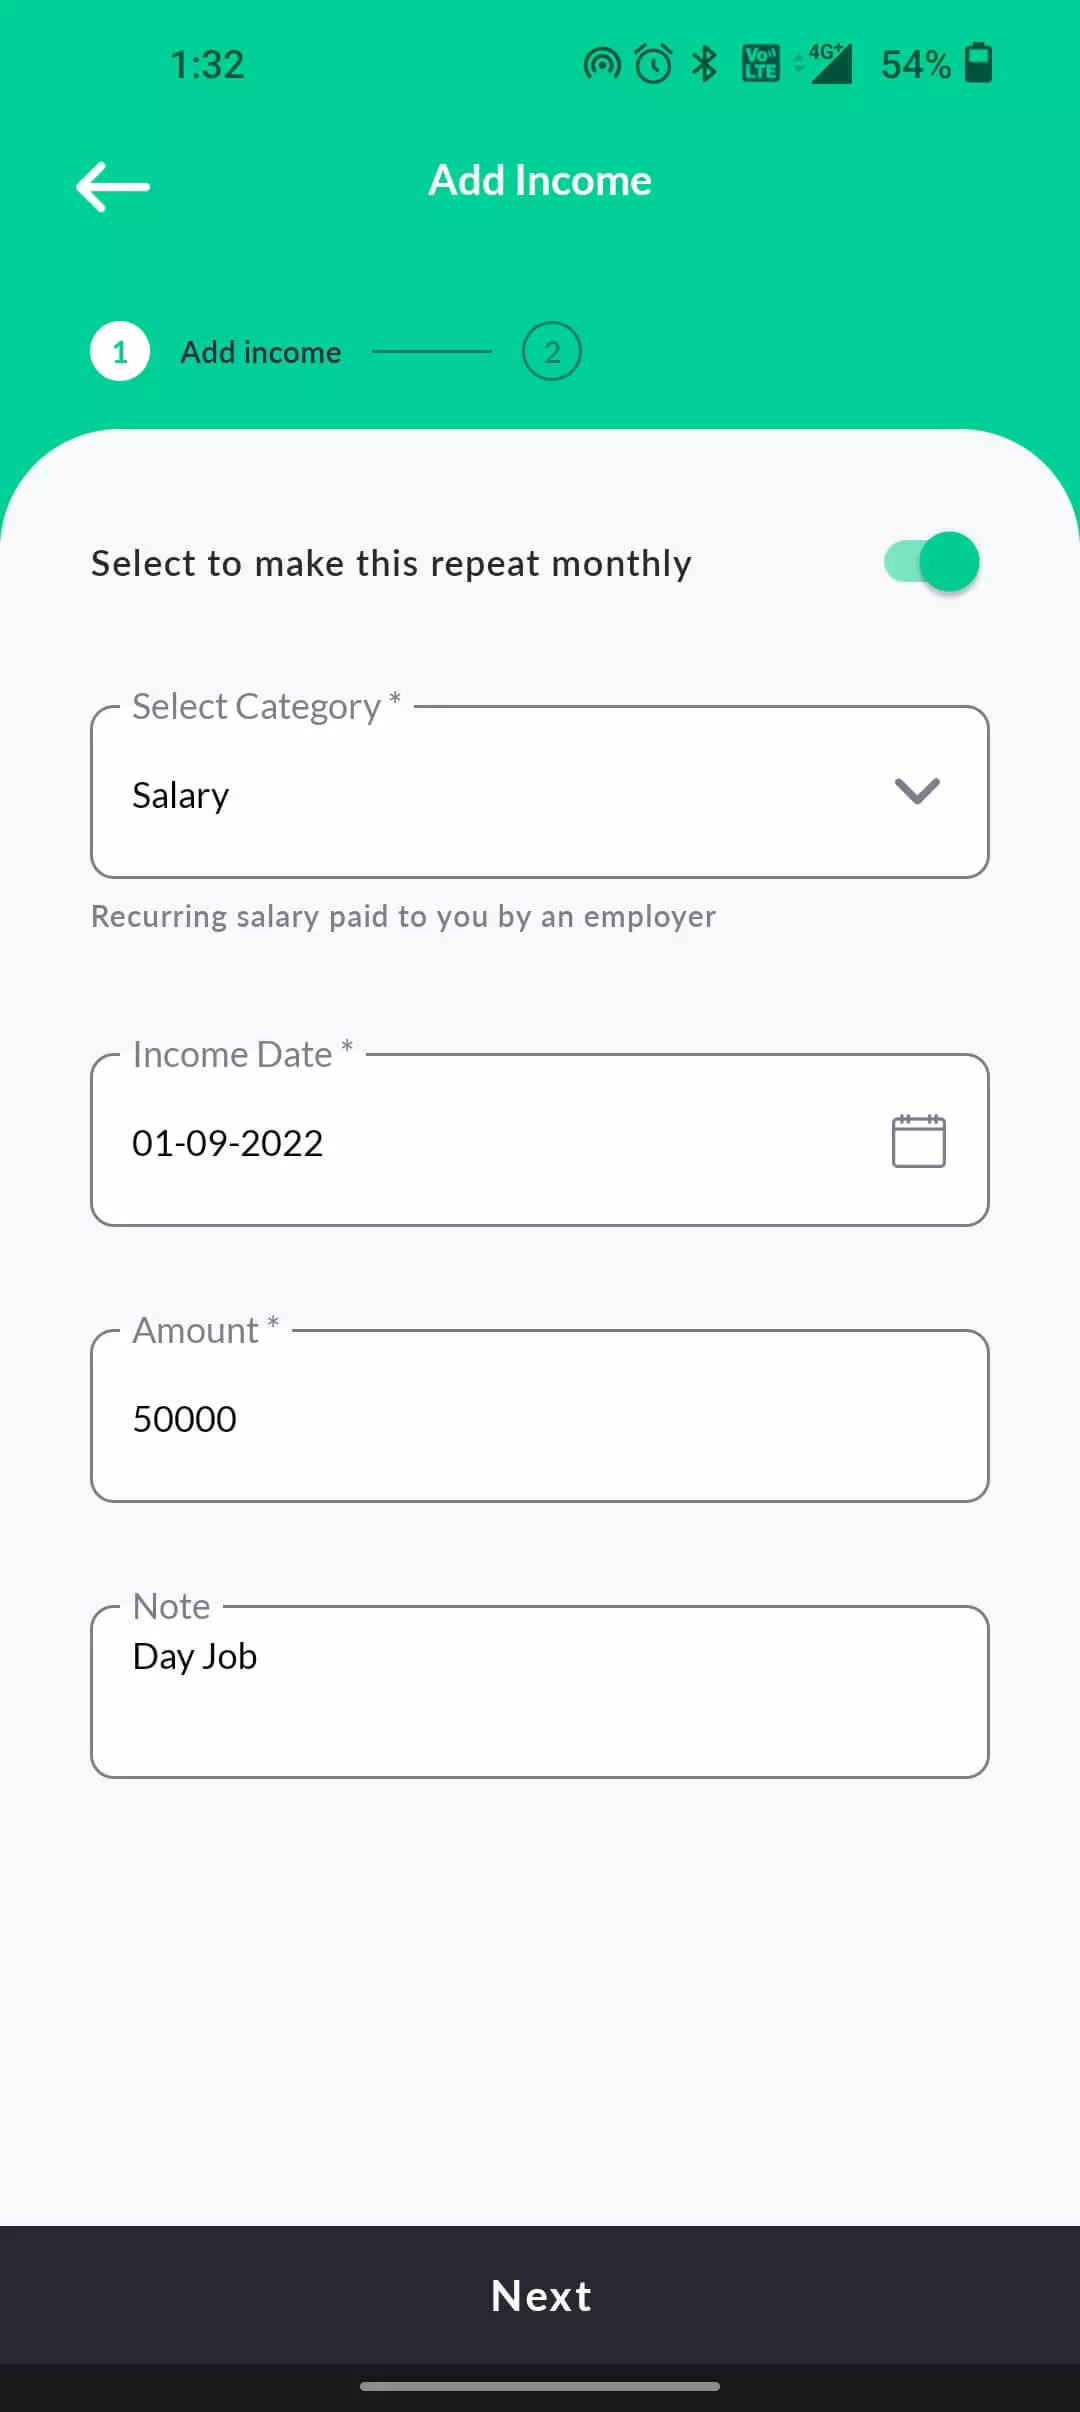 Select category and fill income details